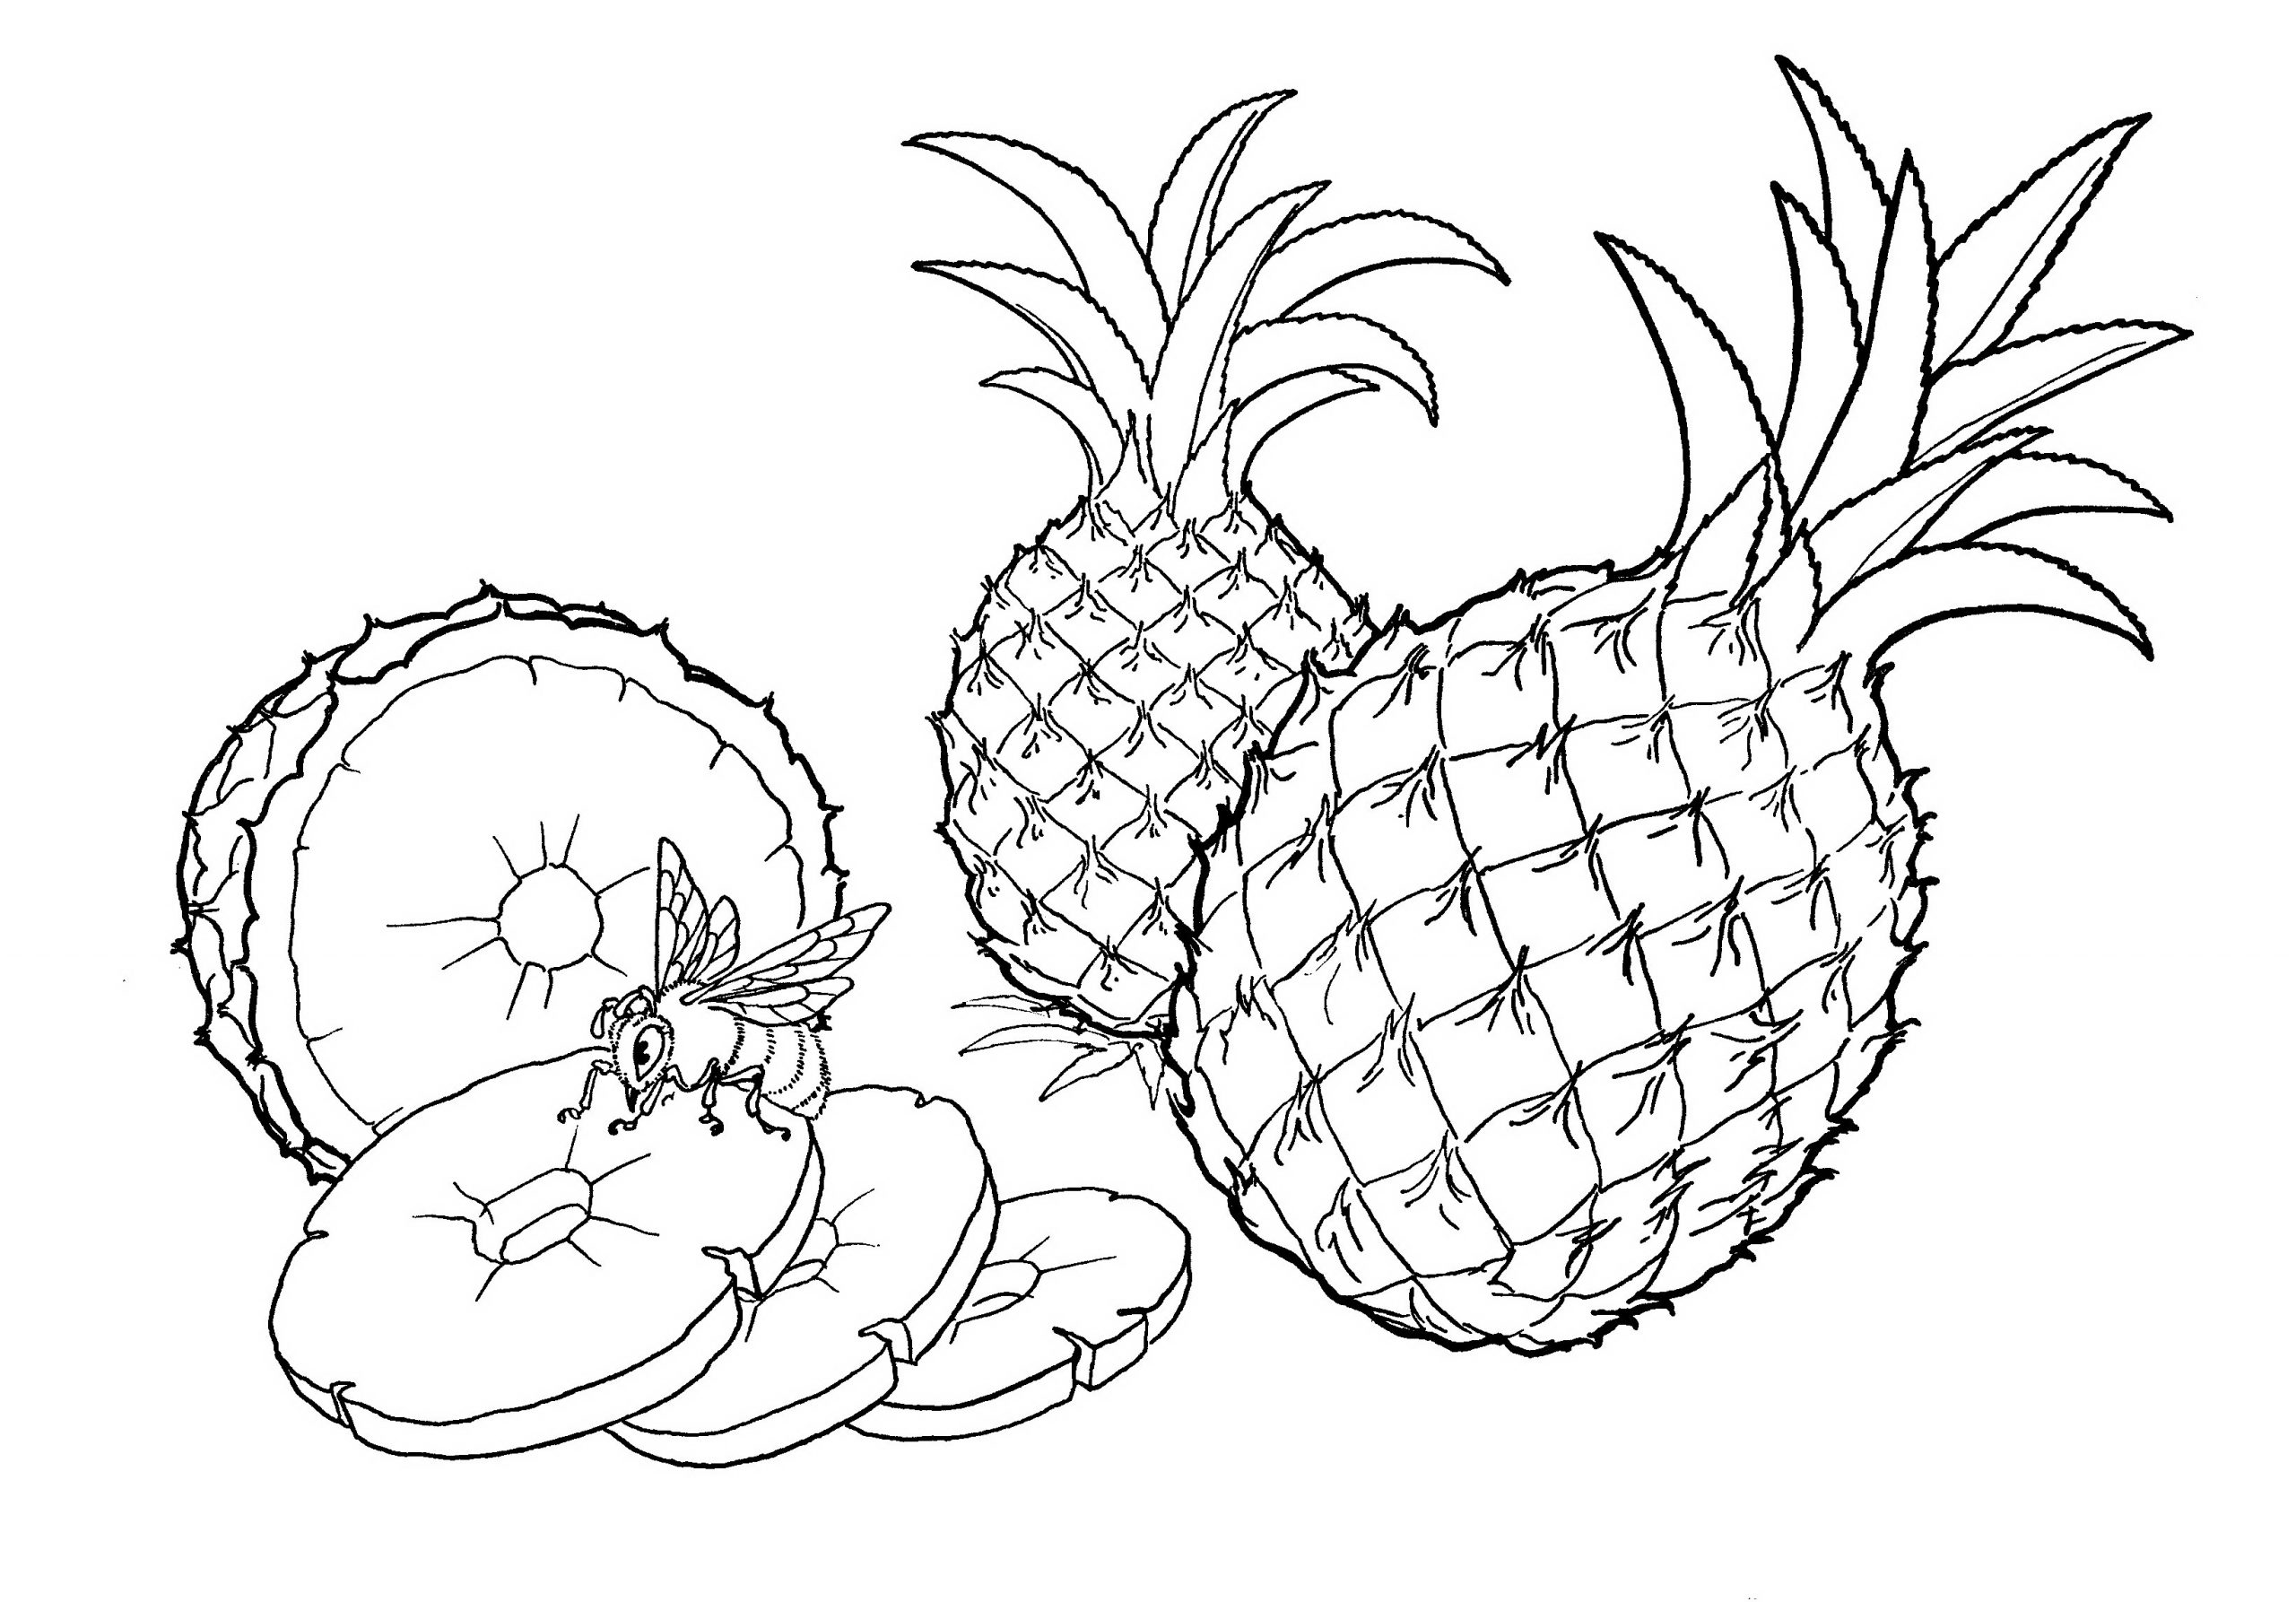 Pineapple and wasp